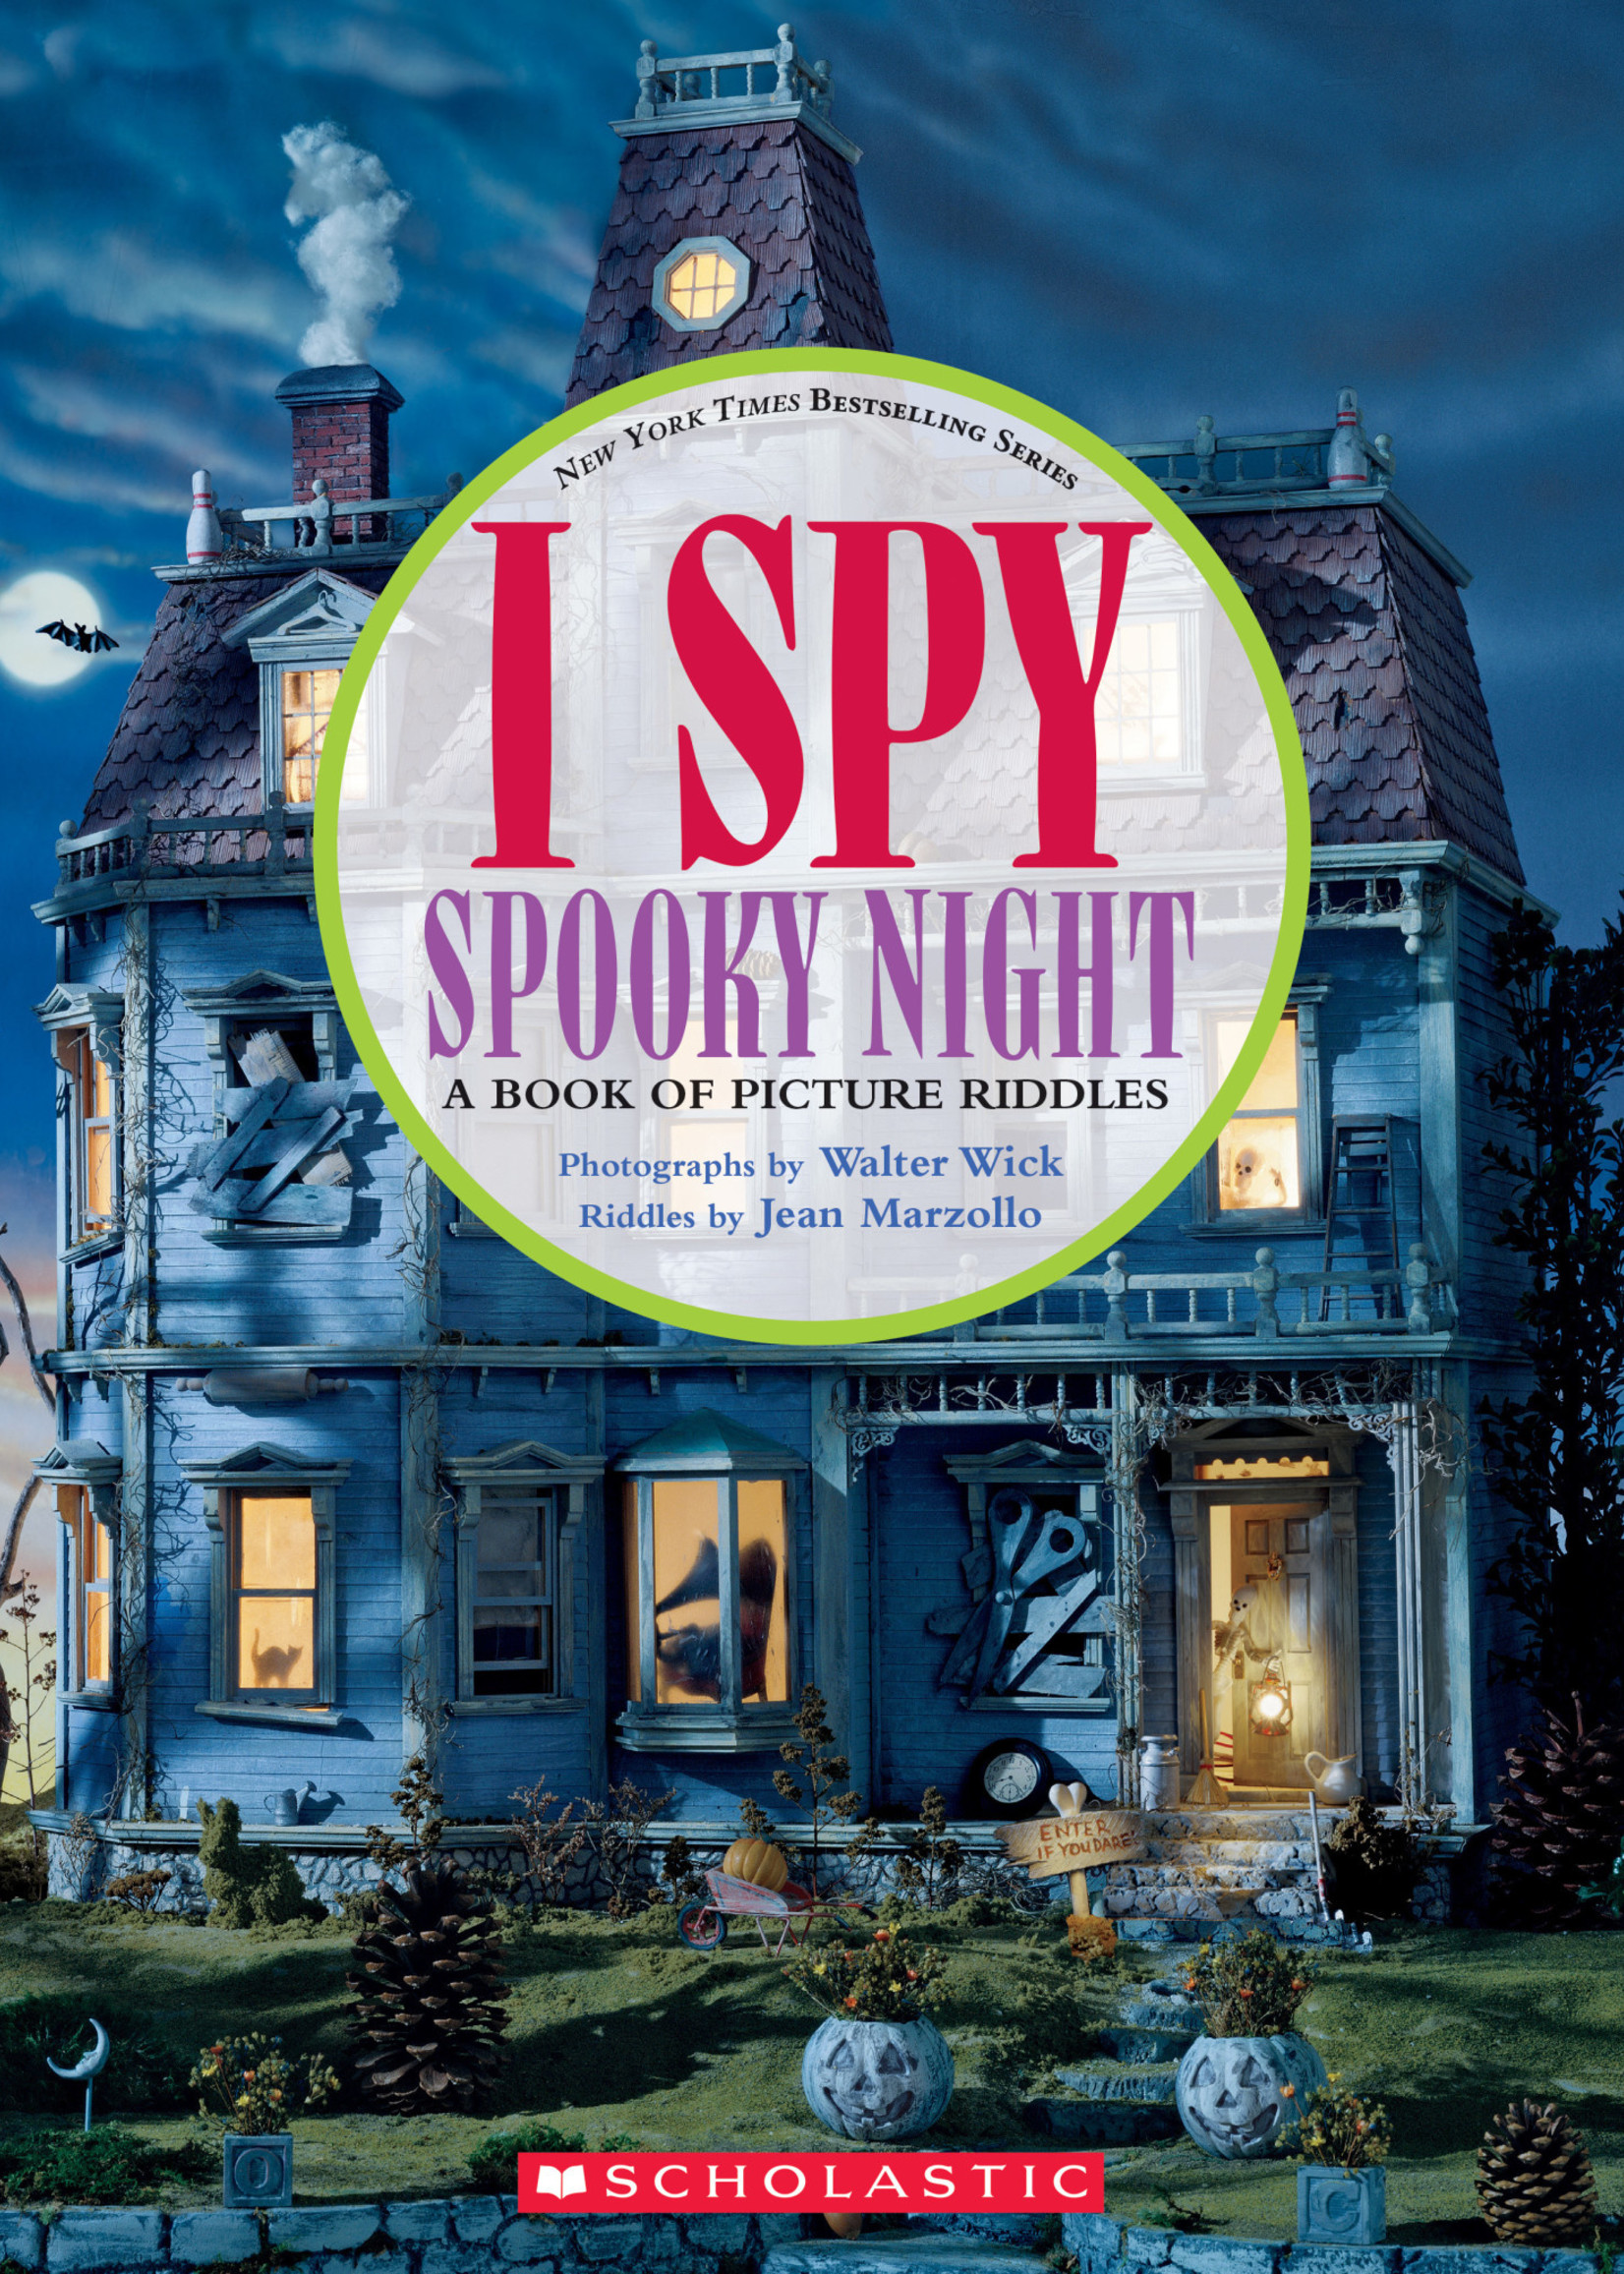 I Spy Spooky Night: A Book of Picture Riddles by Walter Wick and Jean Marzollo